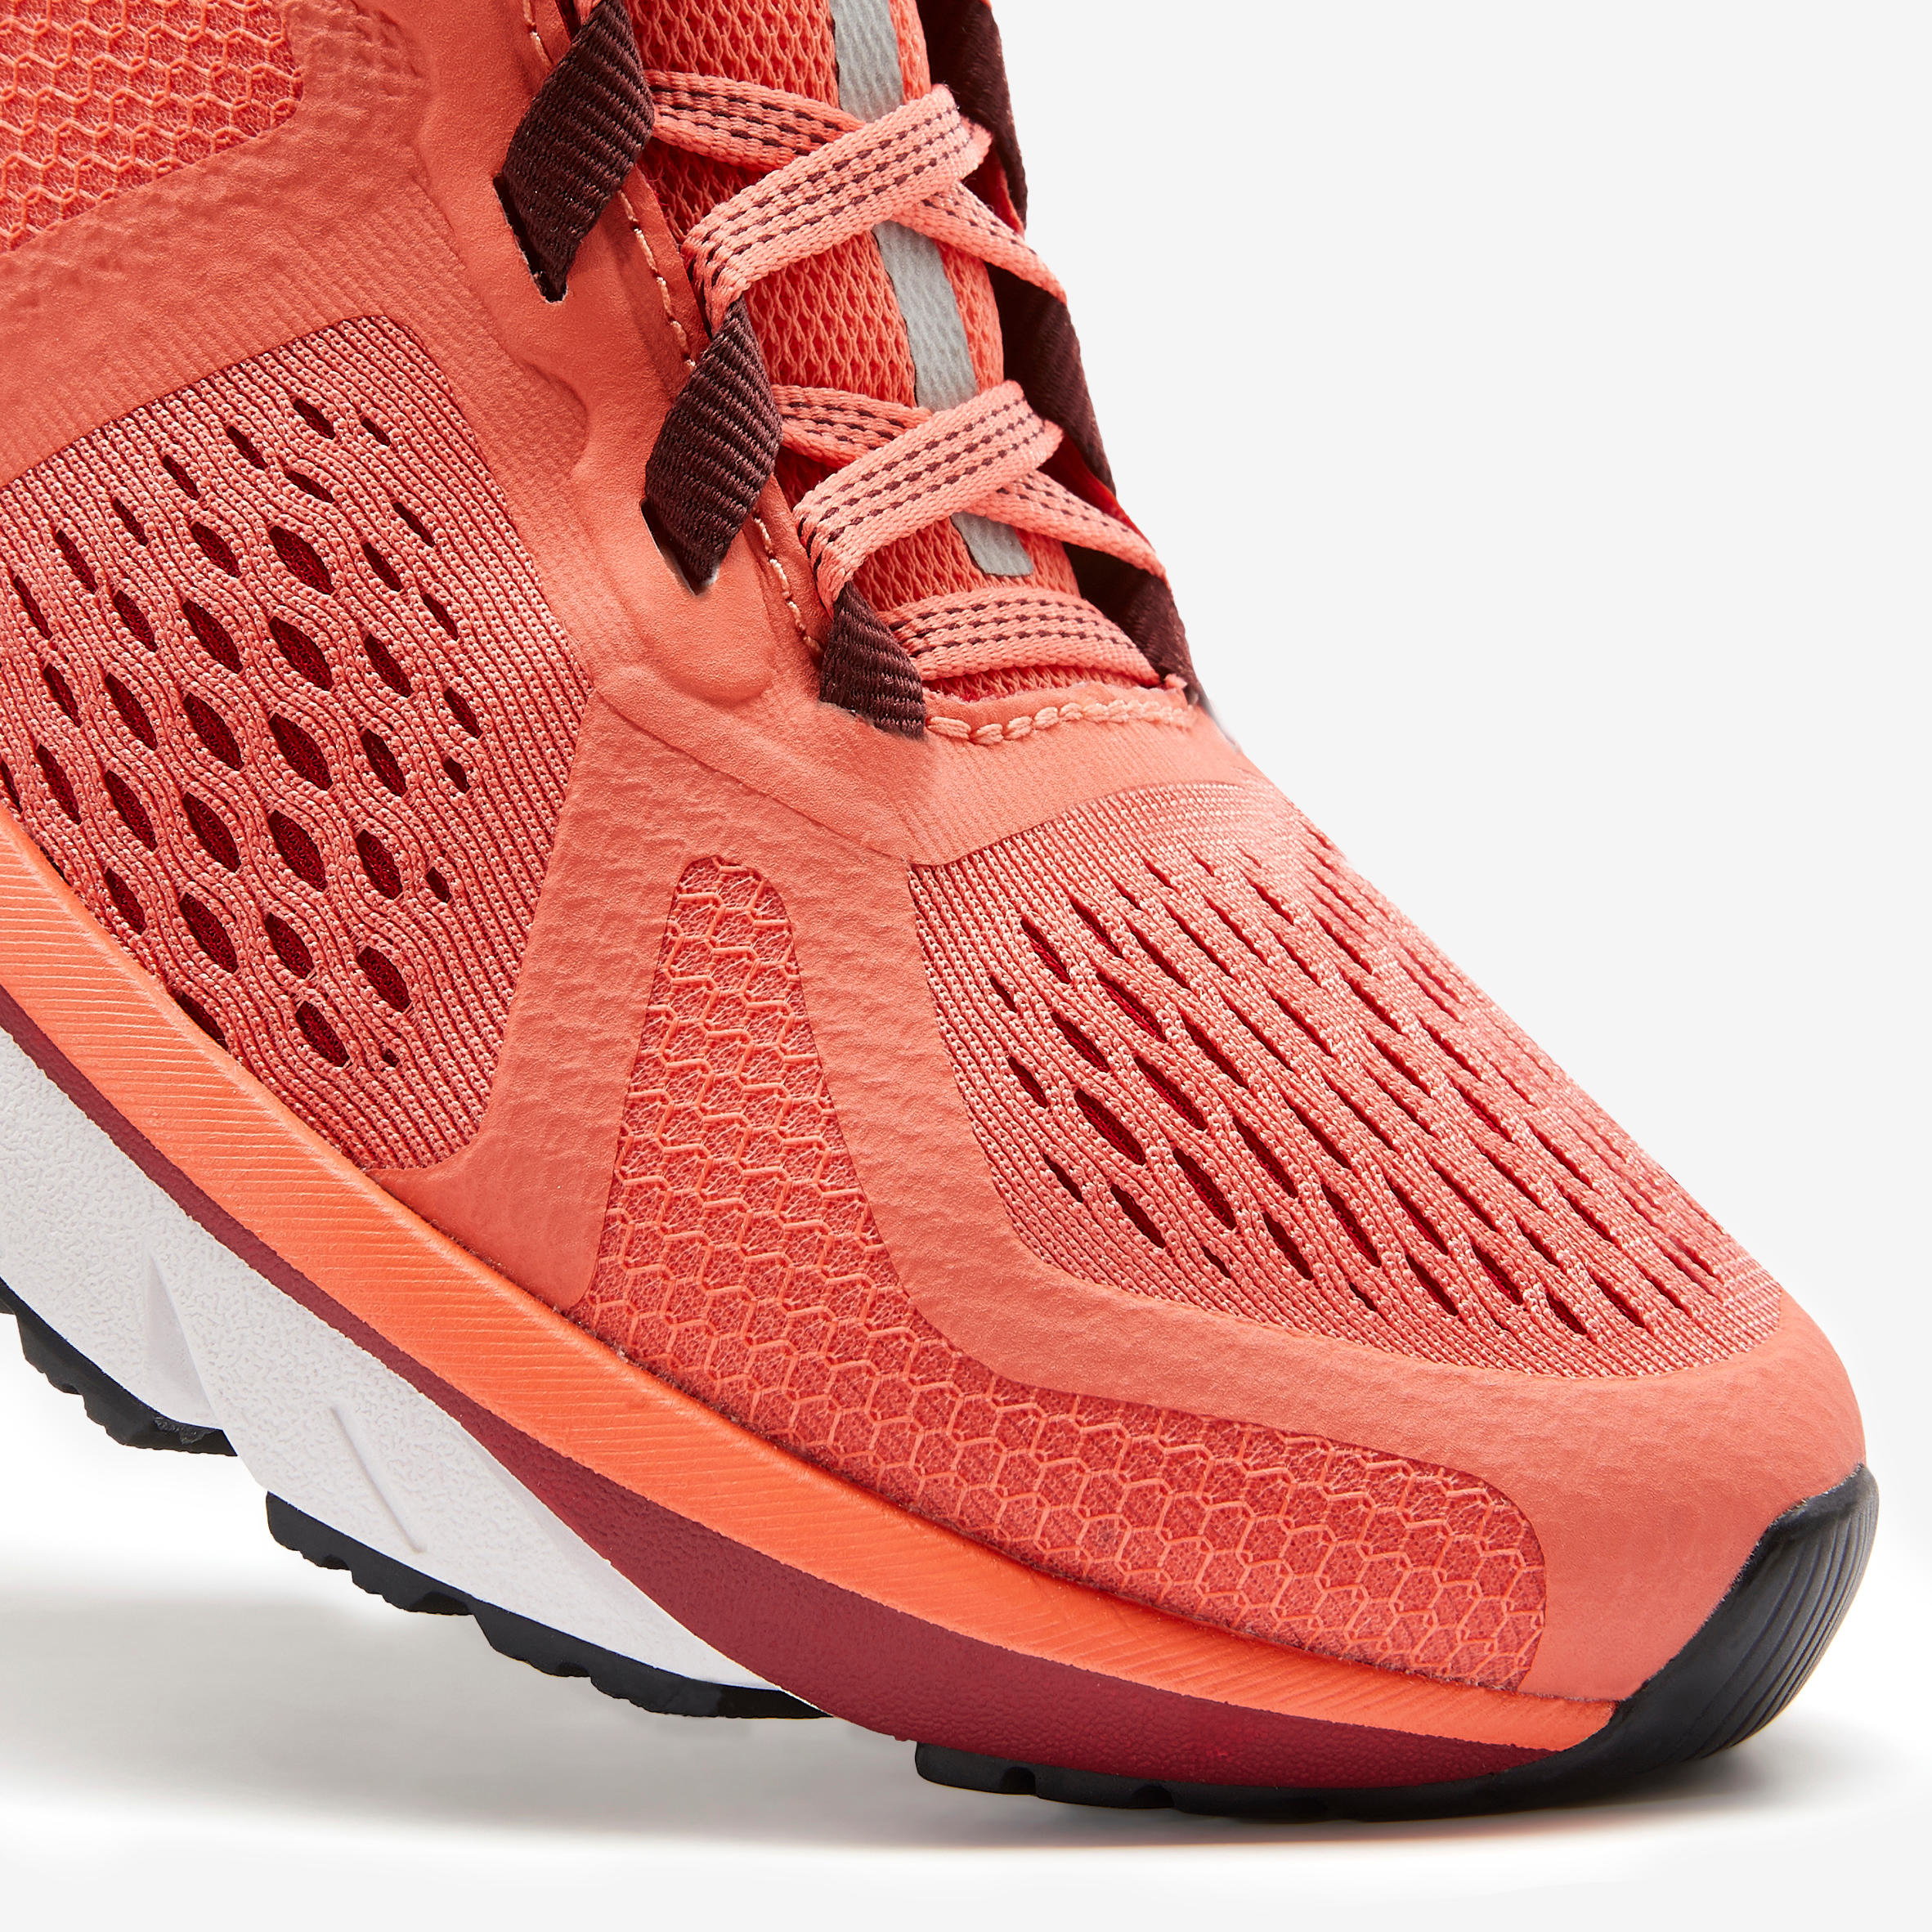 RUNNING SHOES - CORAL - Decathlon